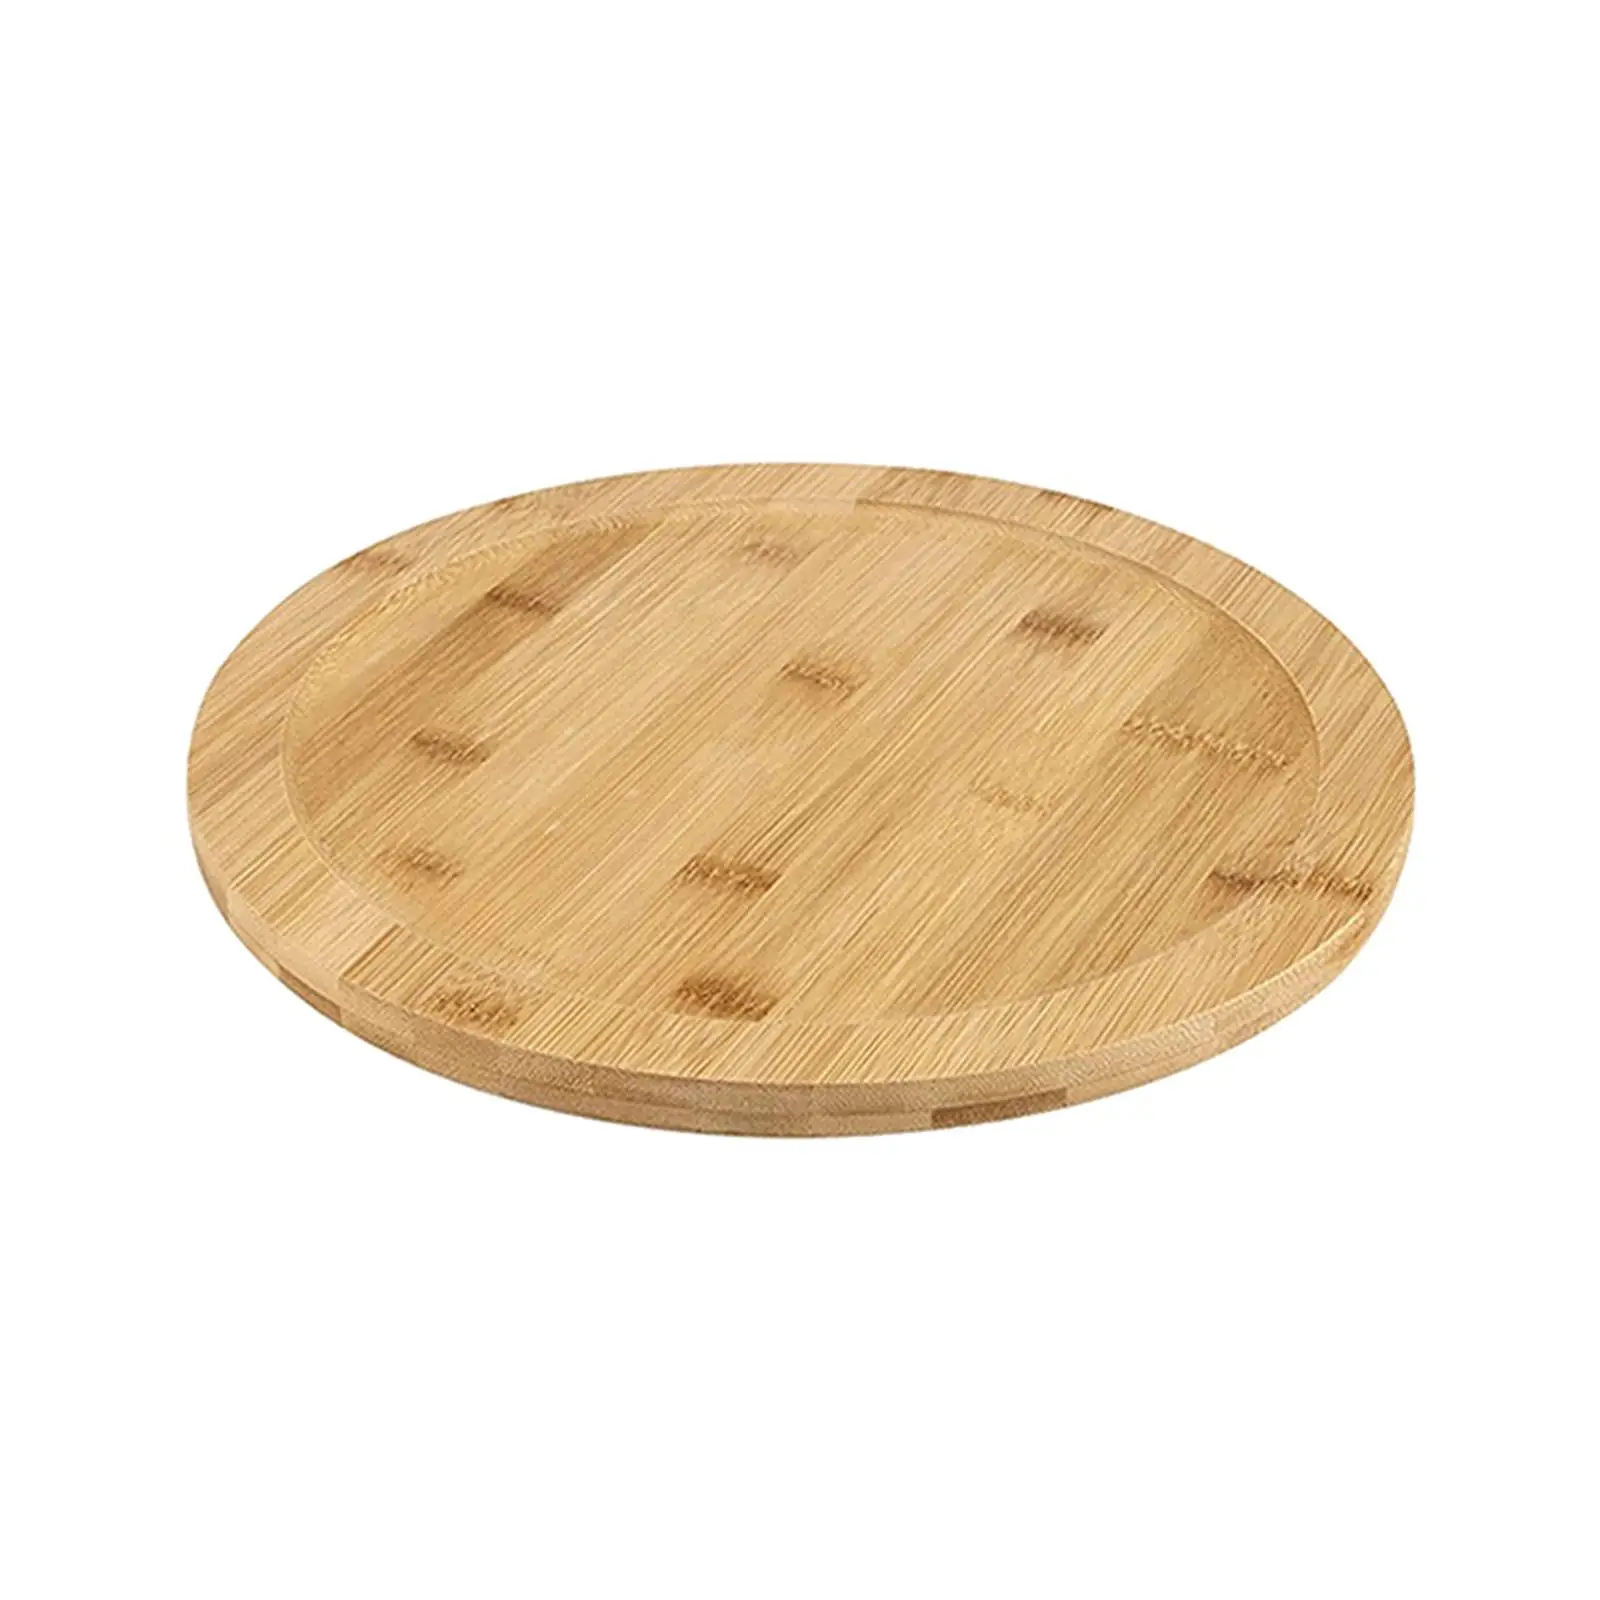 Rotating Base Serving Board Serving Tray Wooden Rotating Dining Plate for Pantry Home Cabinet Dining Table Kitchen